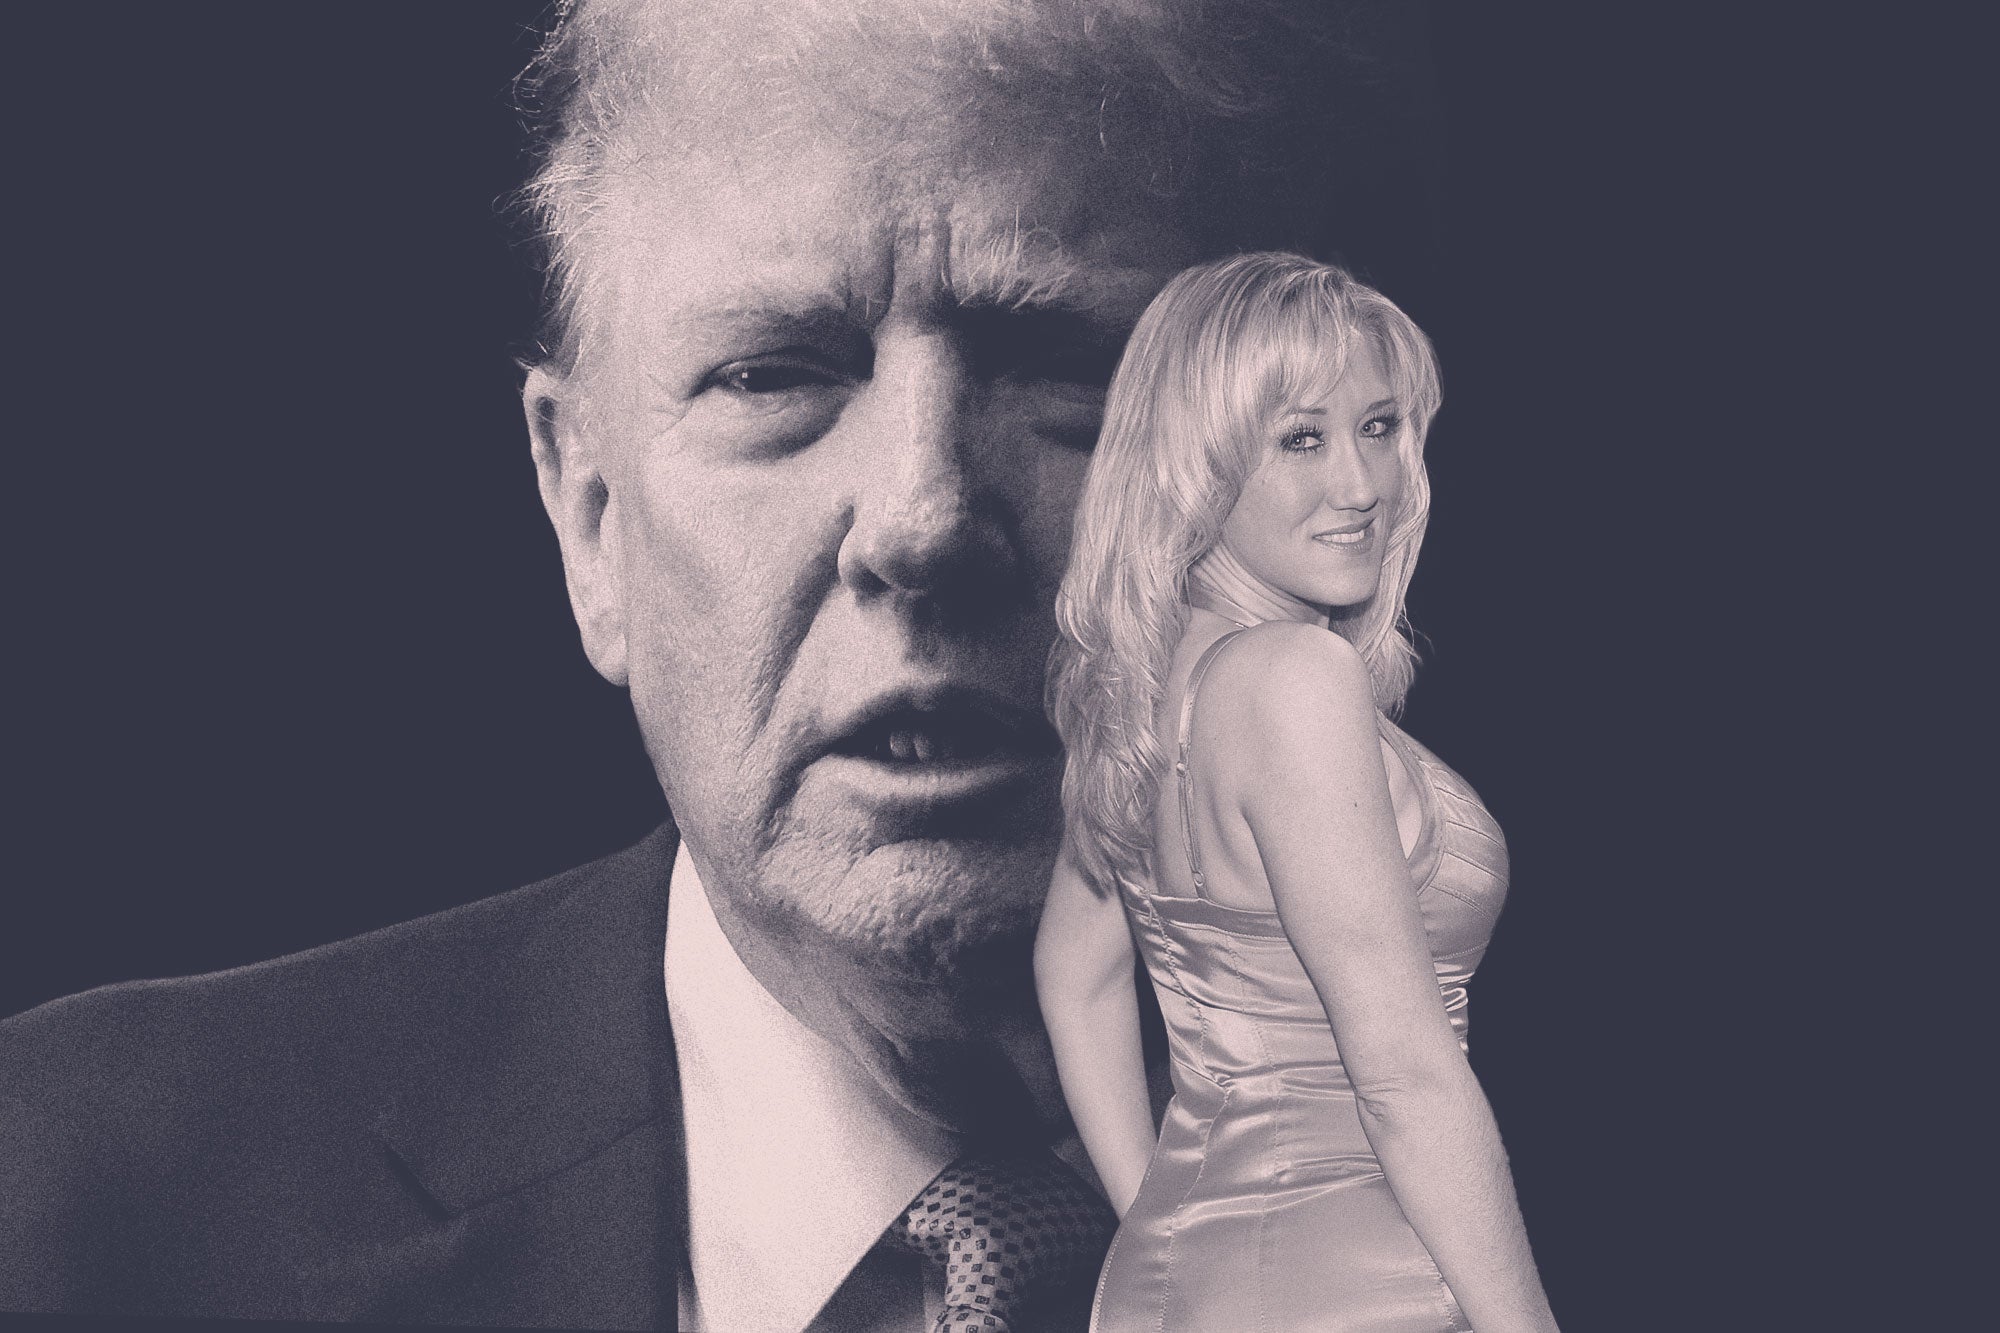 Trump Allegedly Wanted His Night With Stormy Daniels to Be a Threesome. This Is the Other Woman’s Story. Shirin Ali